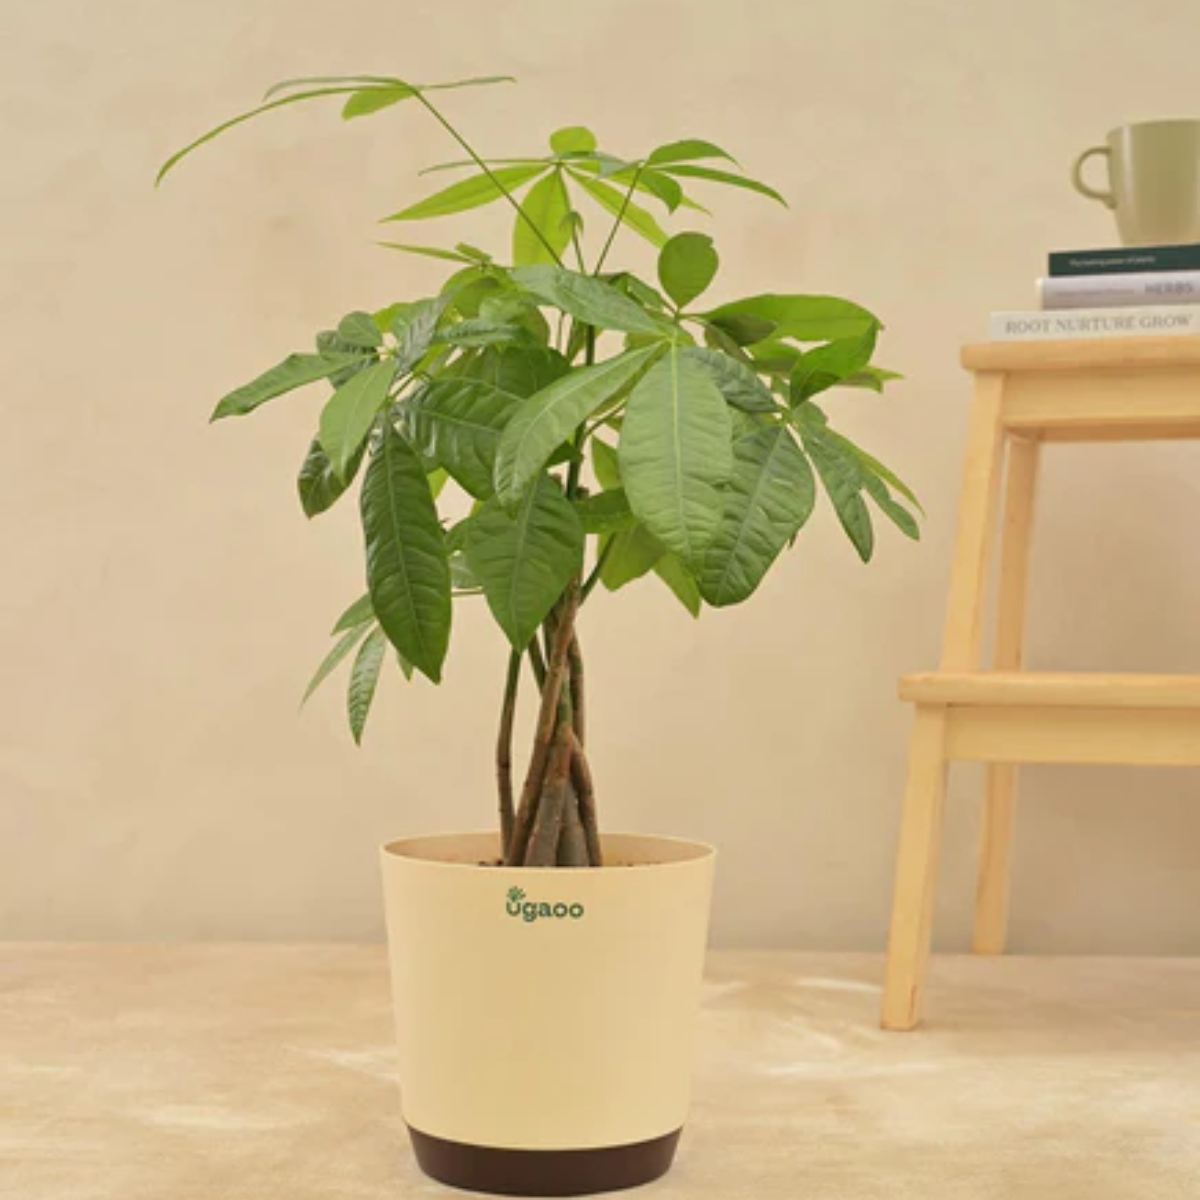 24. 15th Anniversary Year Plant: A Unique and Thoughtful Gift Idea for Him